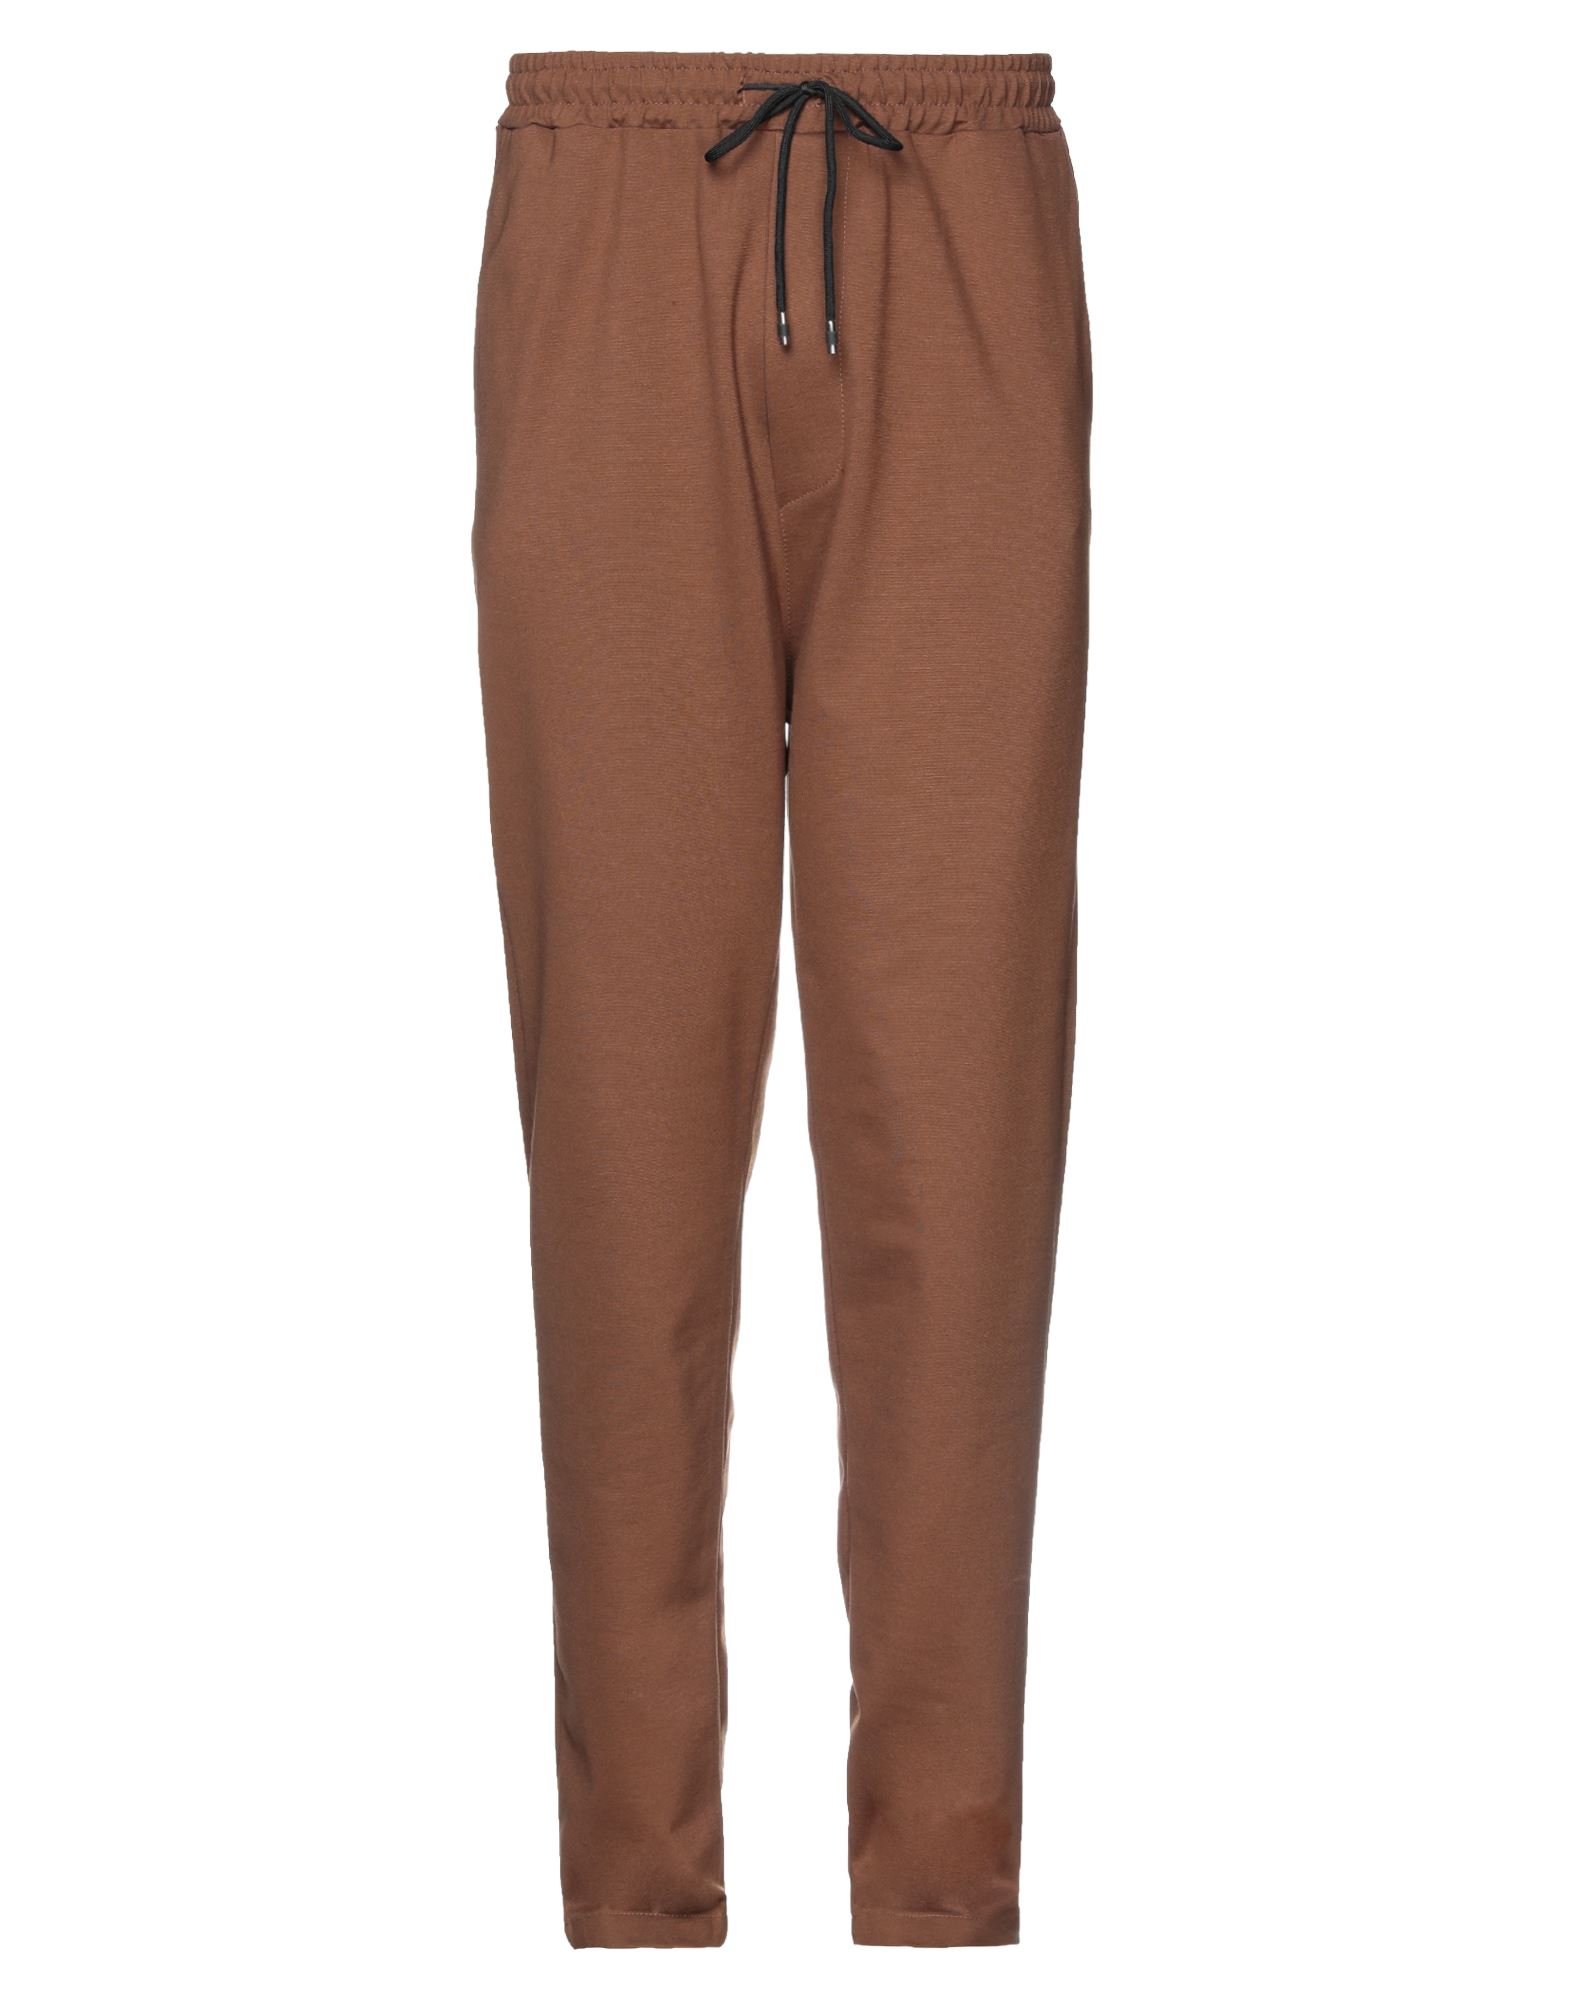 Why Not Brand Pants In Brown